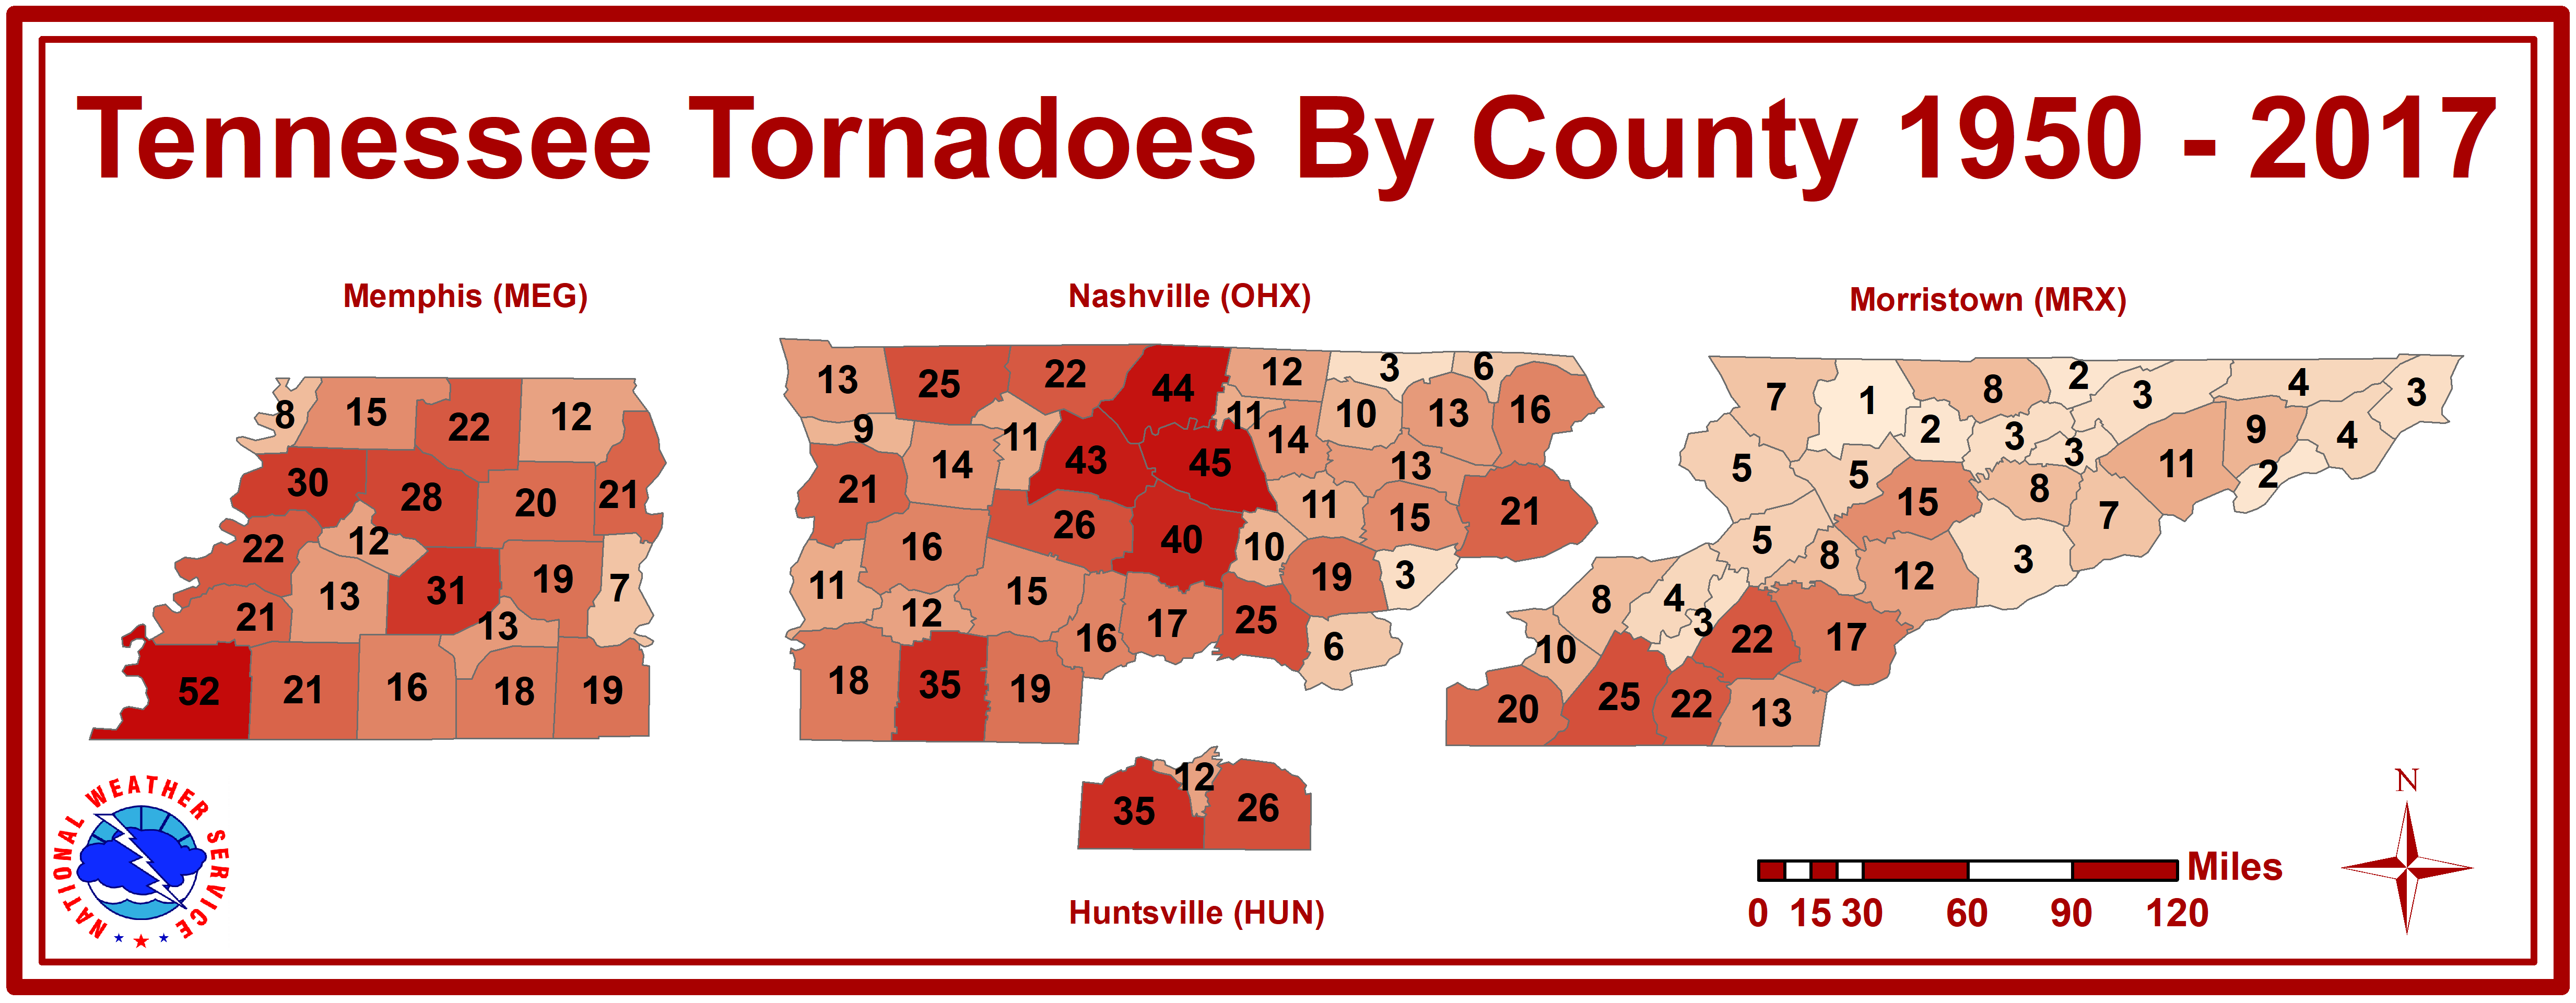 Middle Tennessee Tornado Information